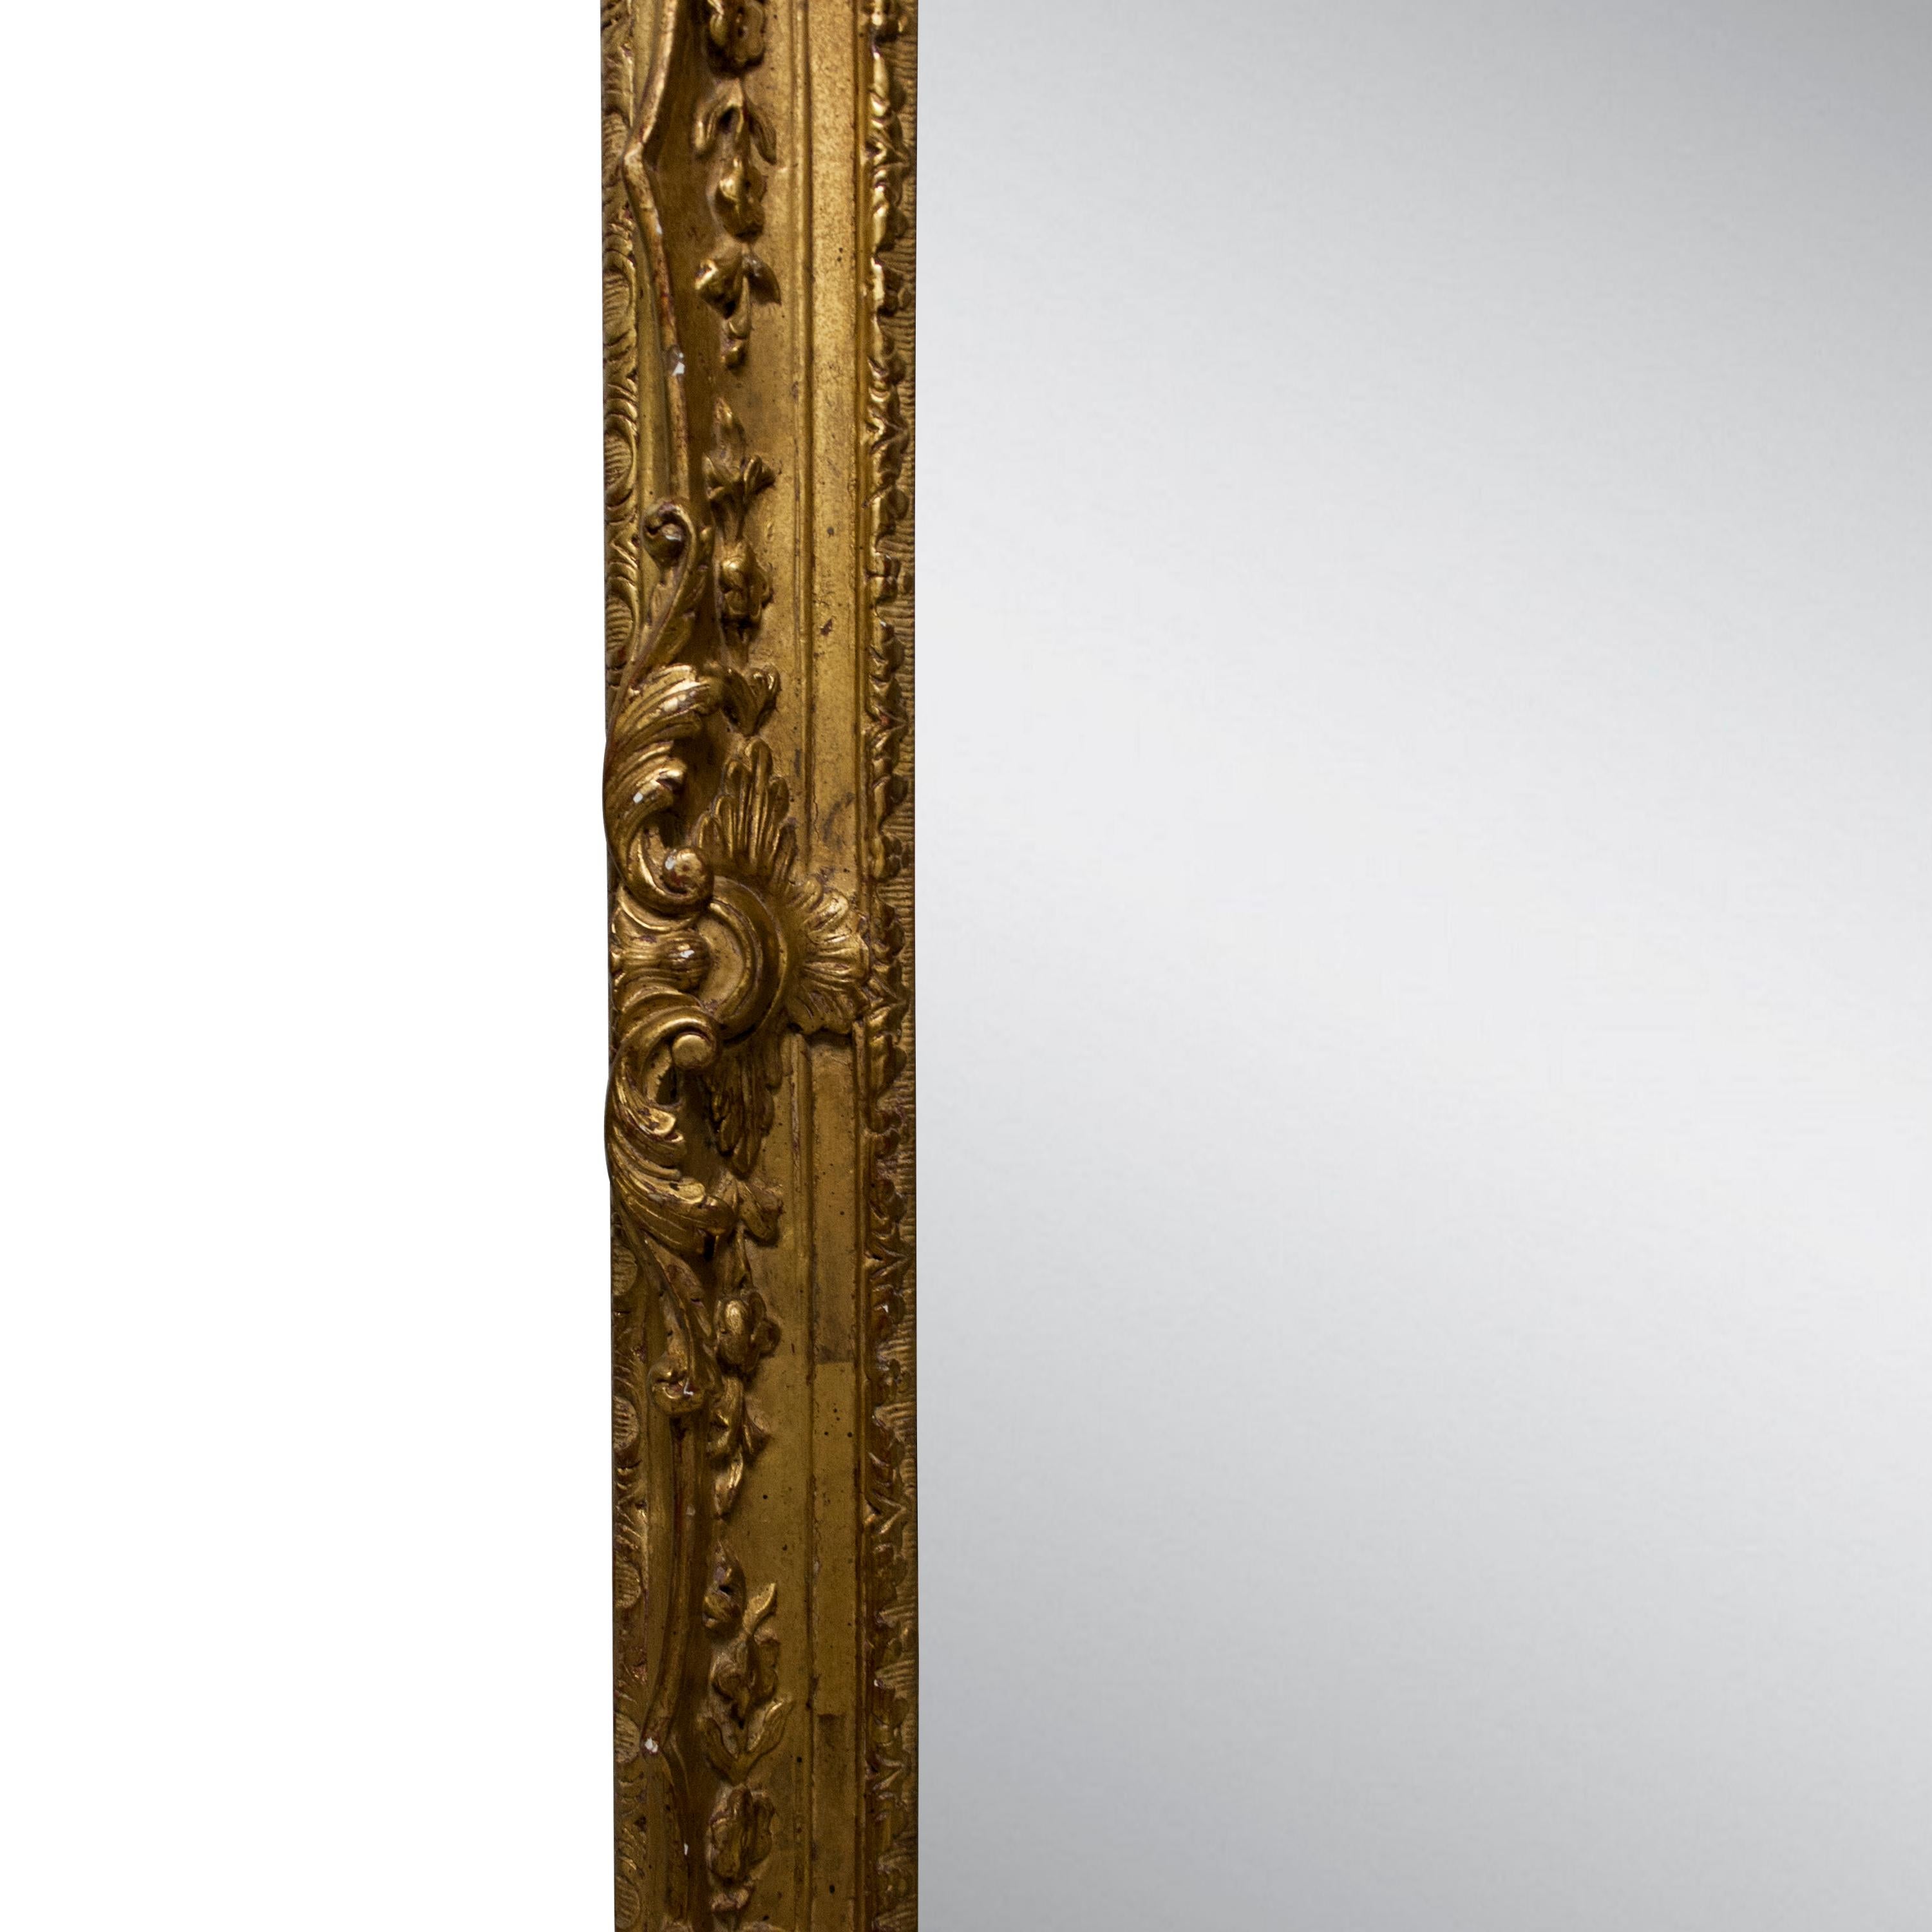 Neoclassical Revival Neoclassical Rectangular Golden Hand Carved Wooden Mirror, Spain, 1970 For Sale